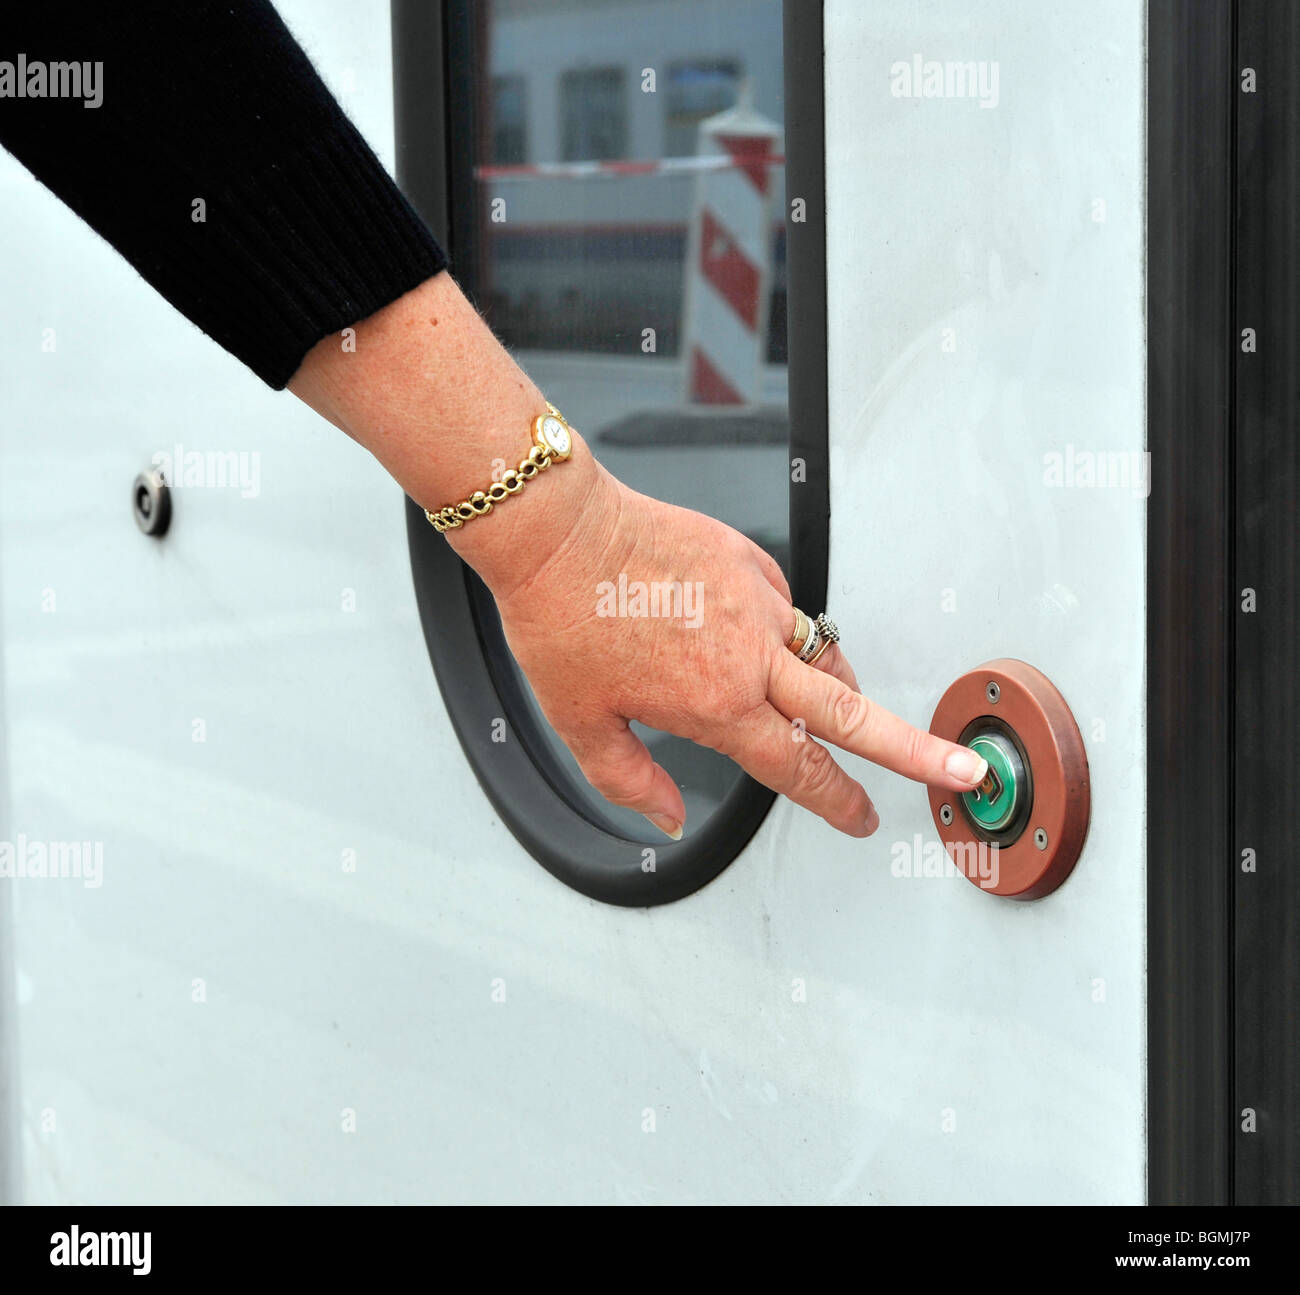 European woman pressing the door release on Luxembourg commuter train. Stock Photo